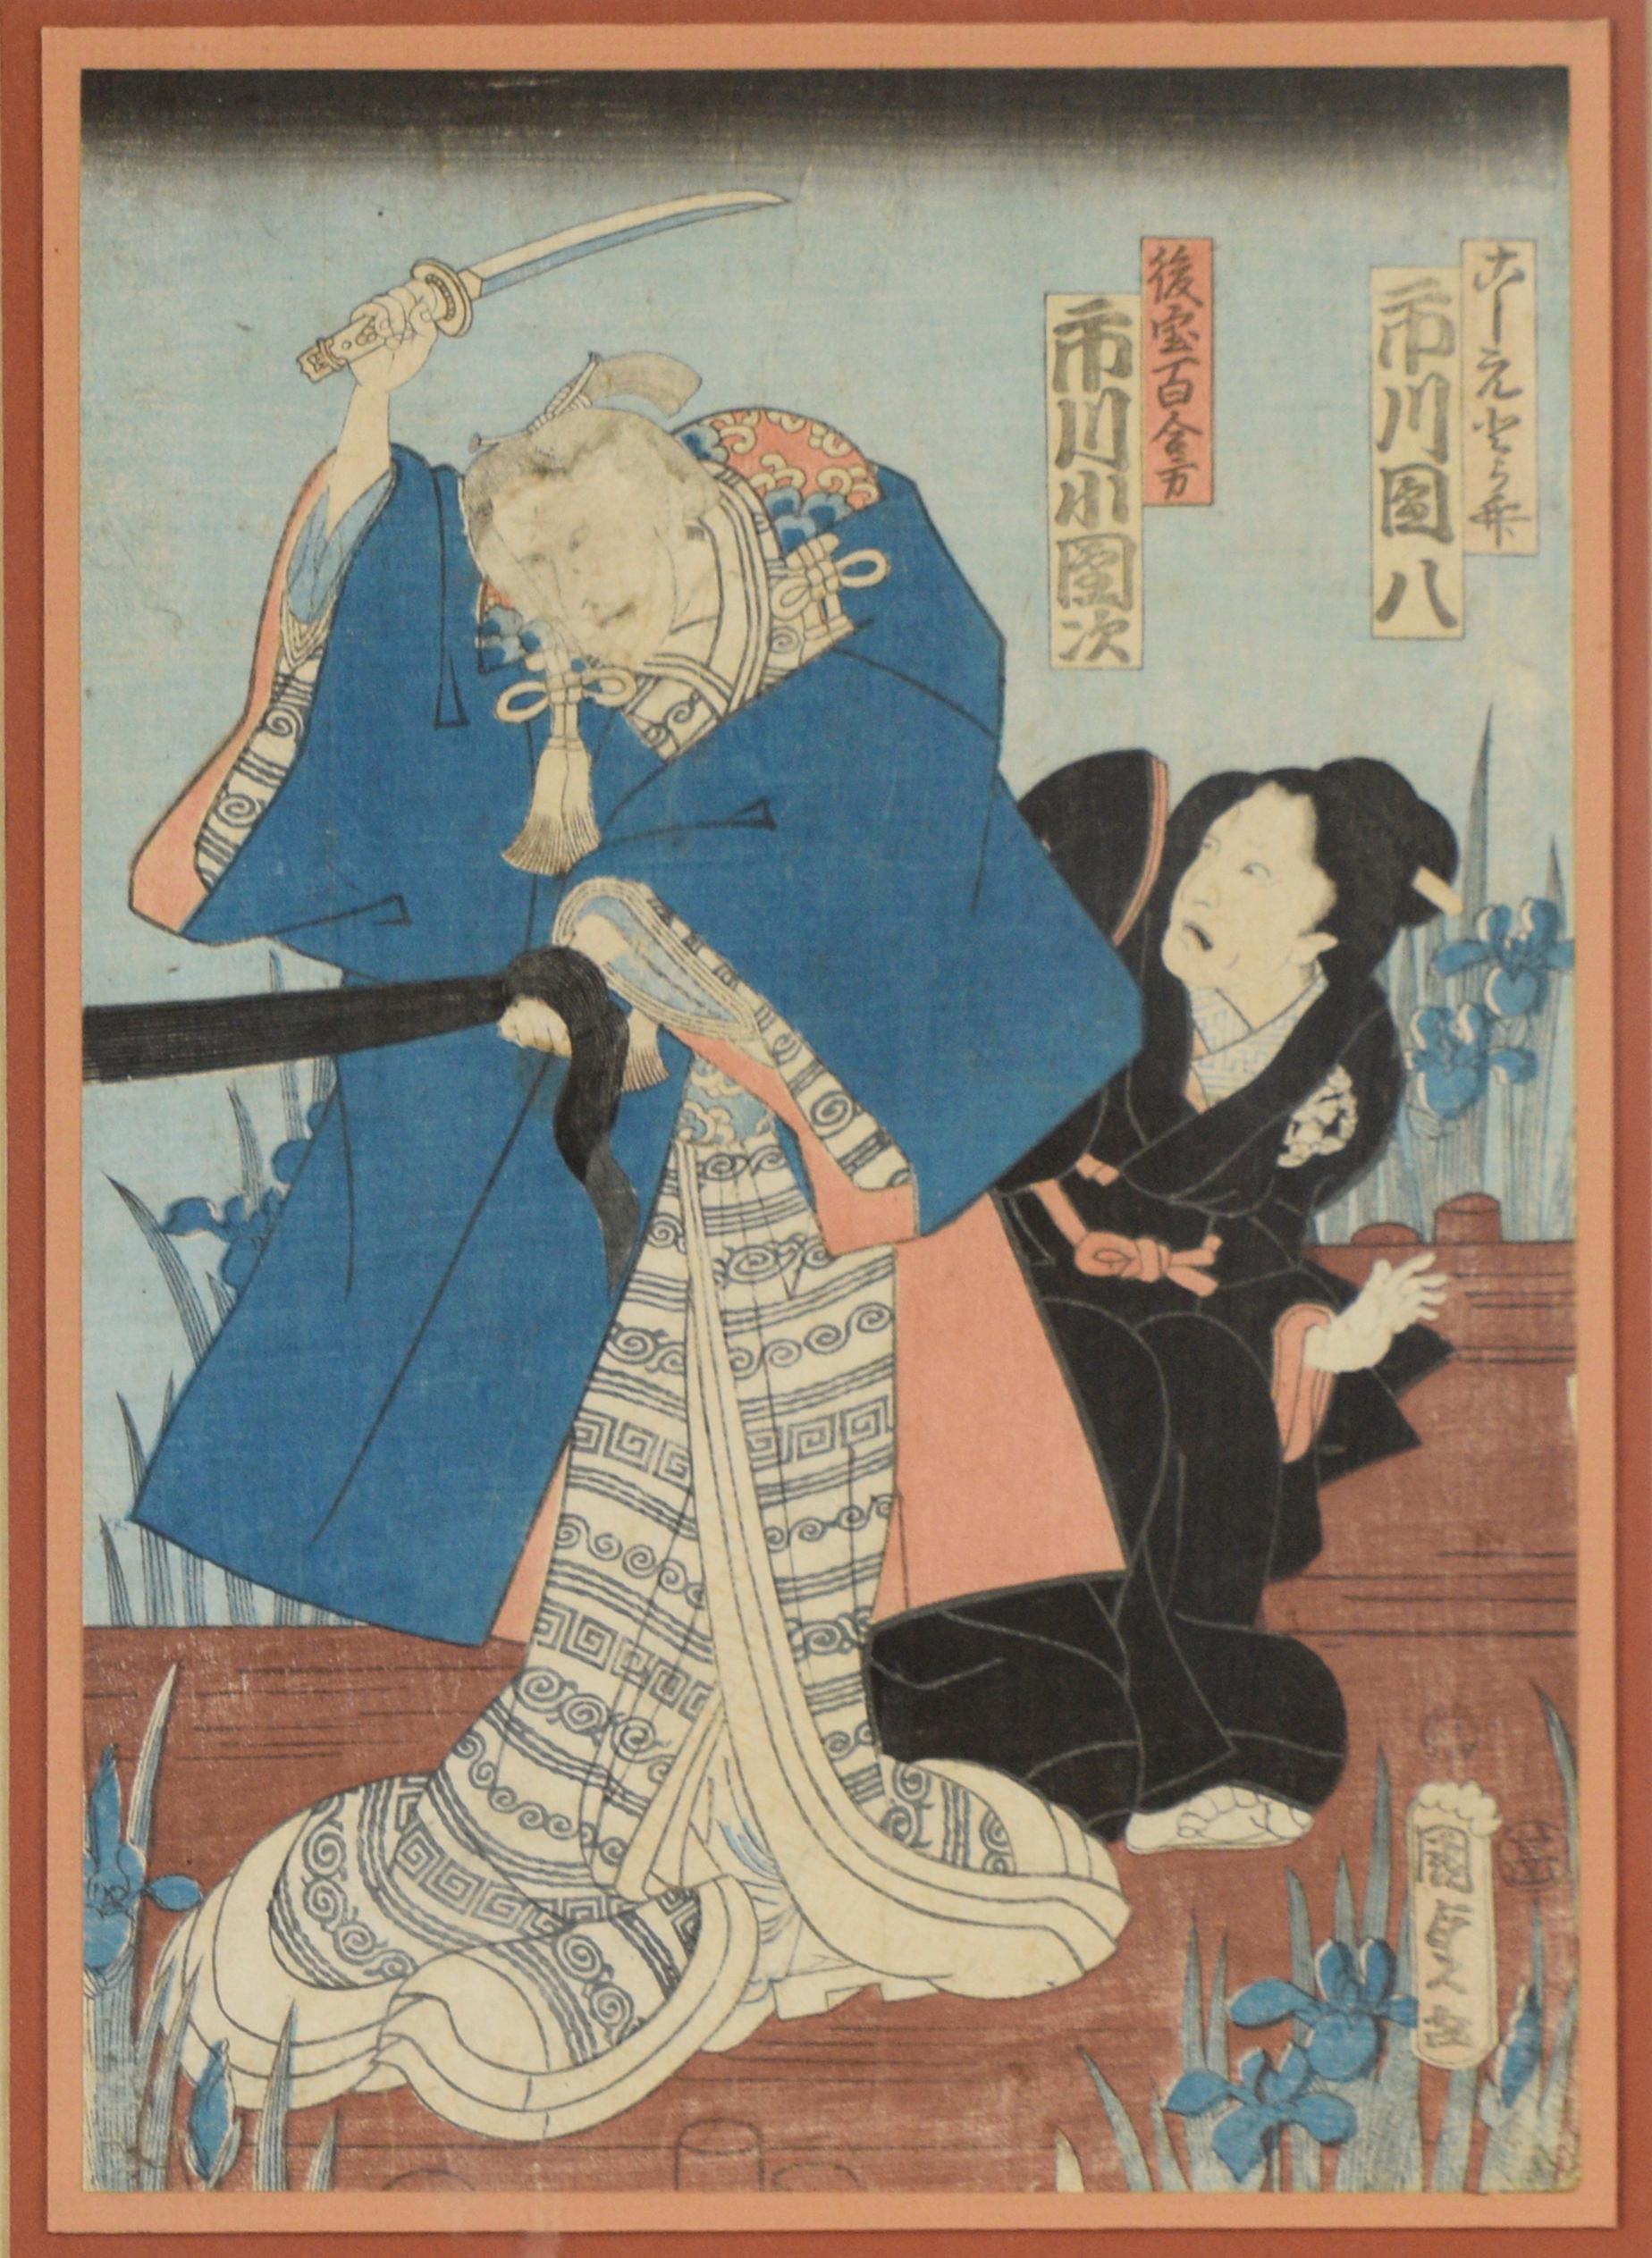 Kabuki Actor in Blue Kimono - Original Woodblock Print

Original woodblock print depicting a Kabuki actor in a blue kimono by Suzuki Harunobu (Japanese, 1725-1770). The actor holds up a sword in his left hand while his right hand is tied in a black